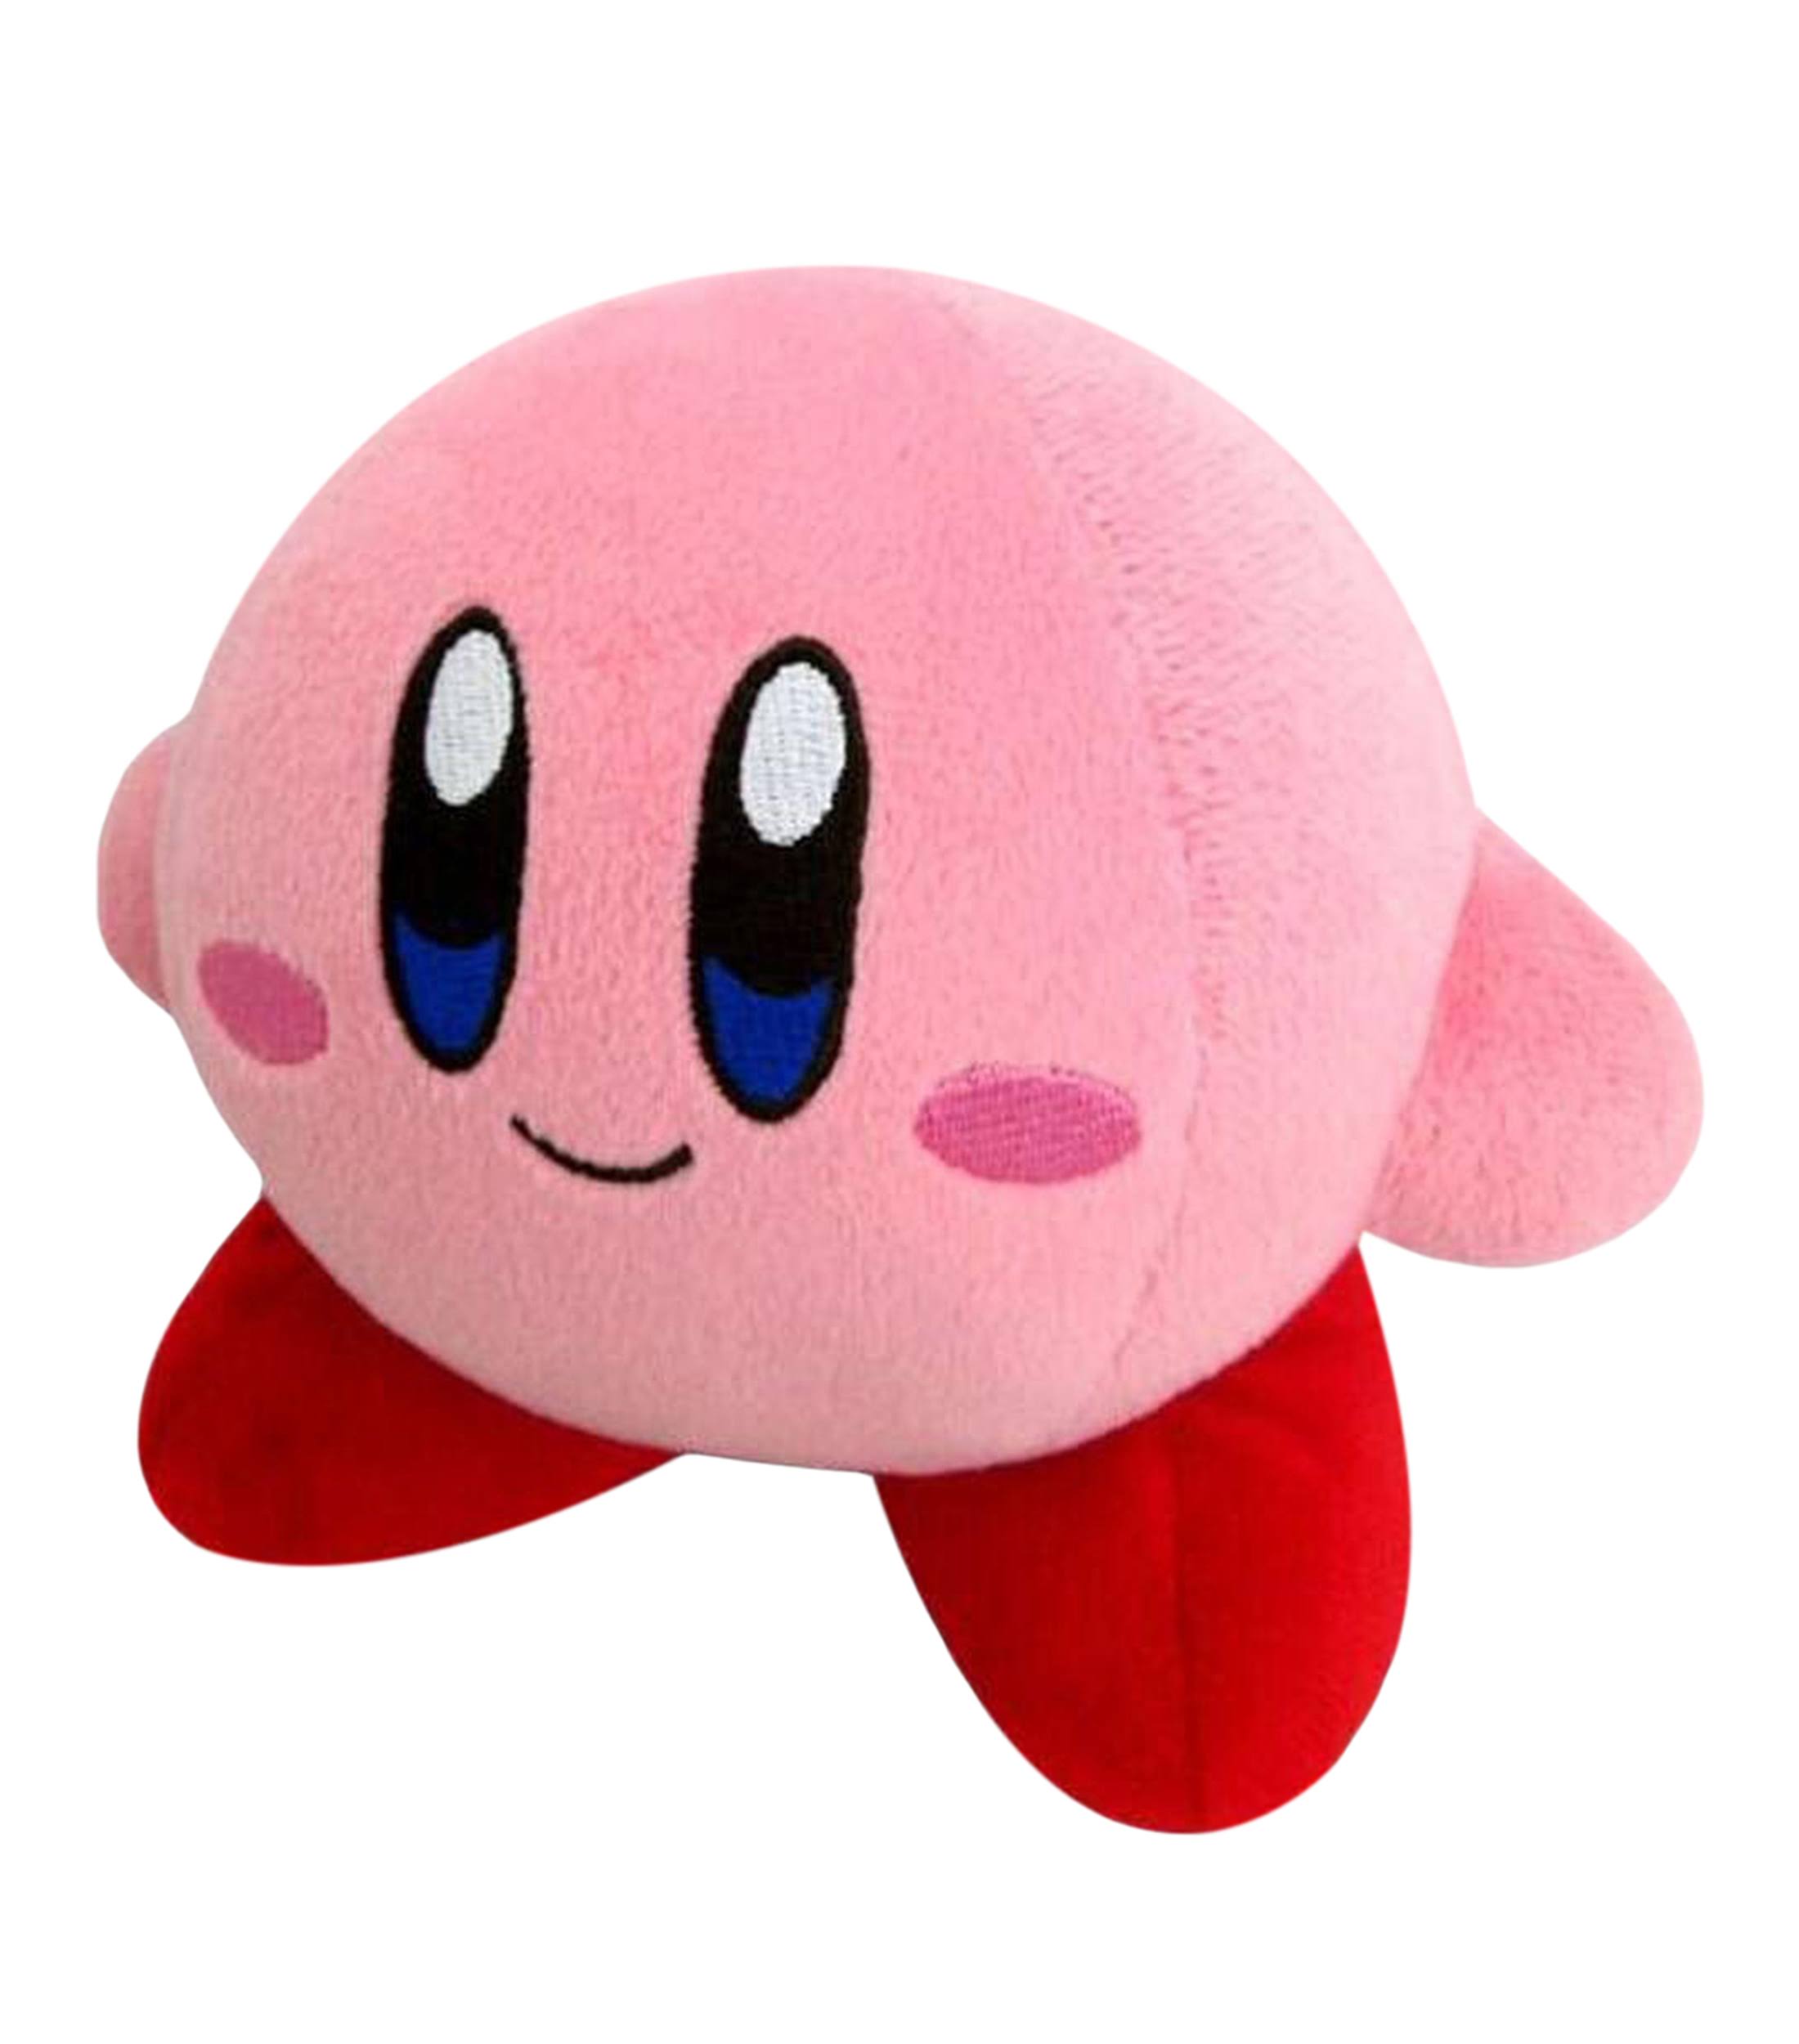 Nintendo Little Buddy All Star Collection Plush Doll - Kirby, 15"